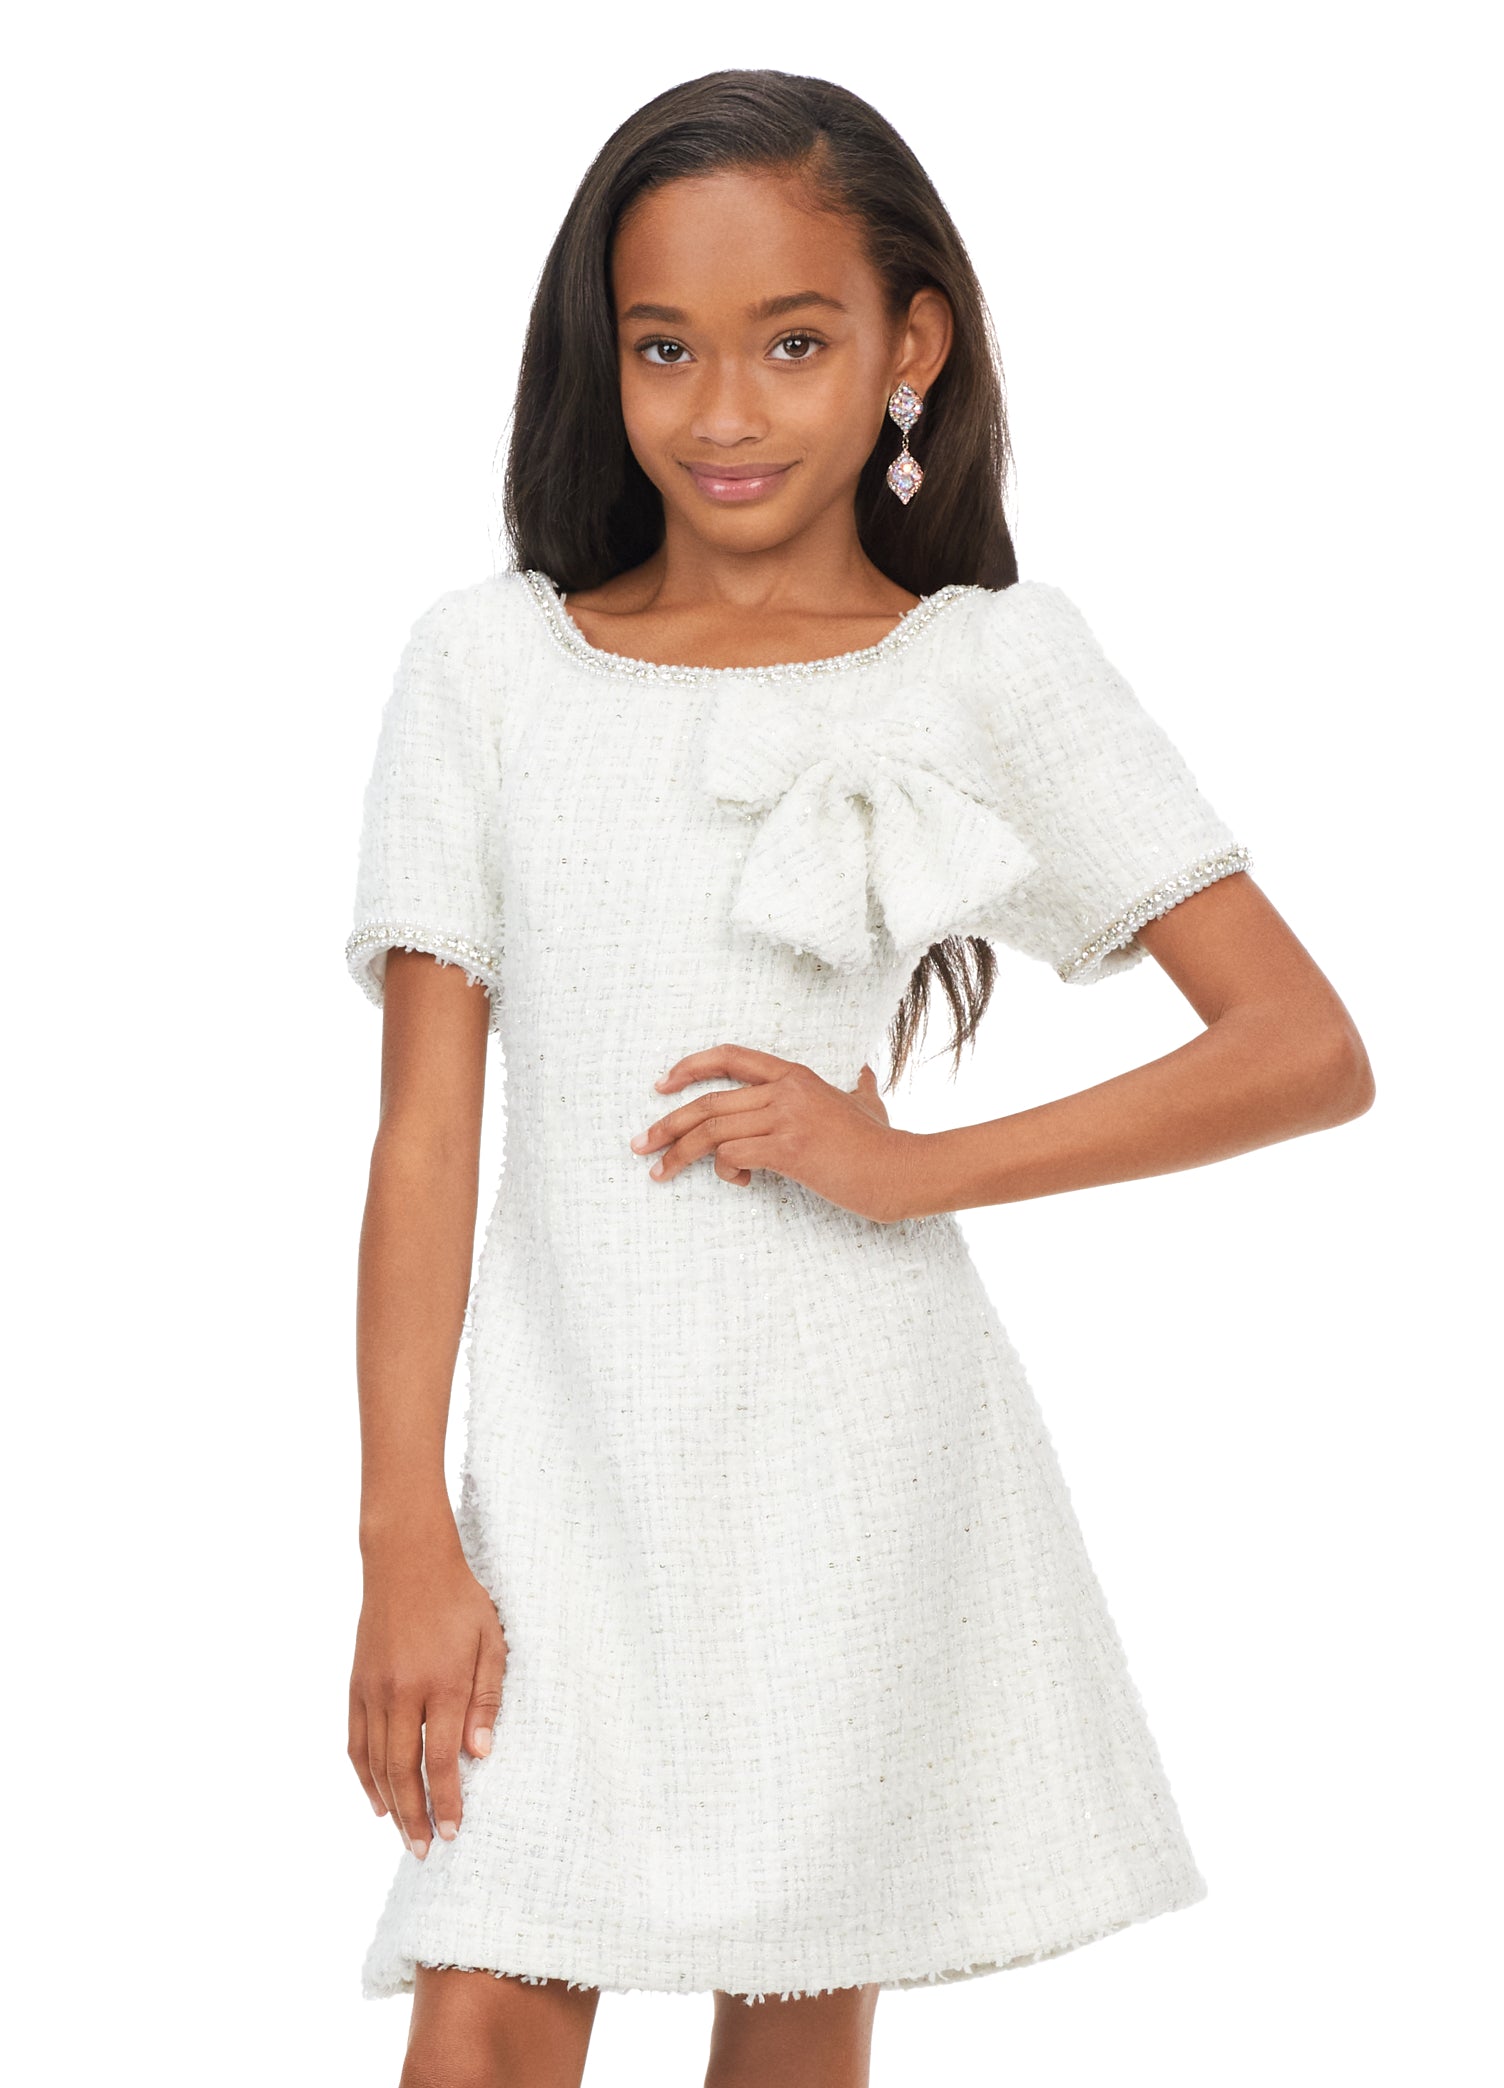 Amazon.com: Toddler Kids Baby Girl Ruffle Off Shoulder Summer Lace Mini Dress  White (5-6 Years, White): Clothing, Shoes & Jewelry